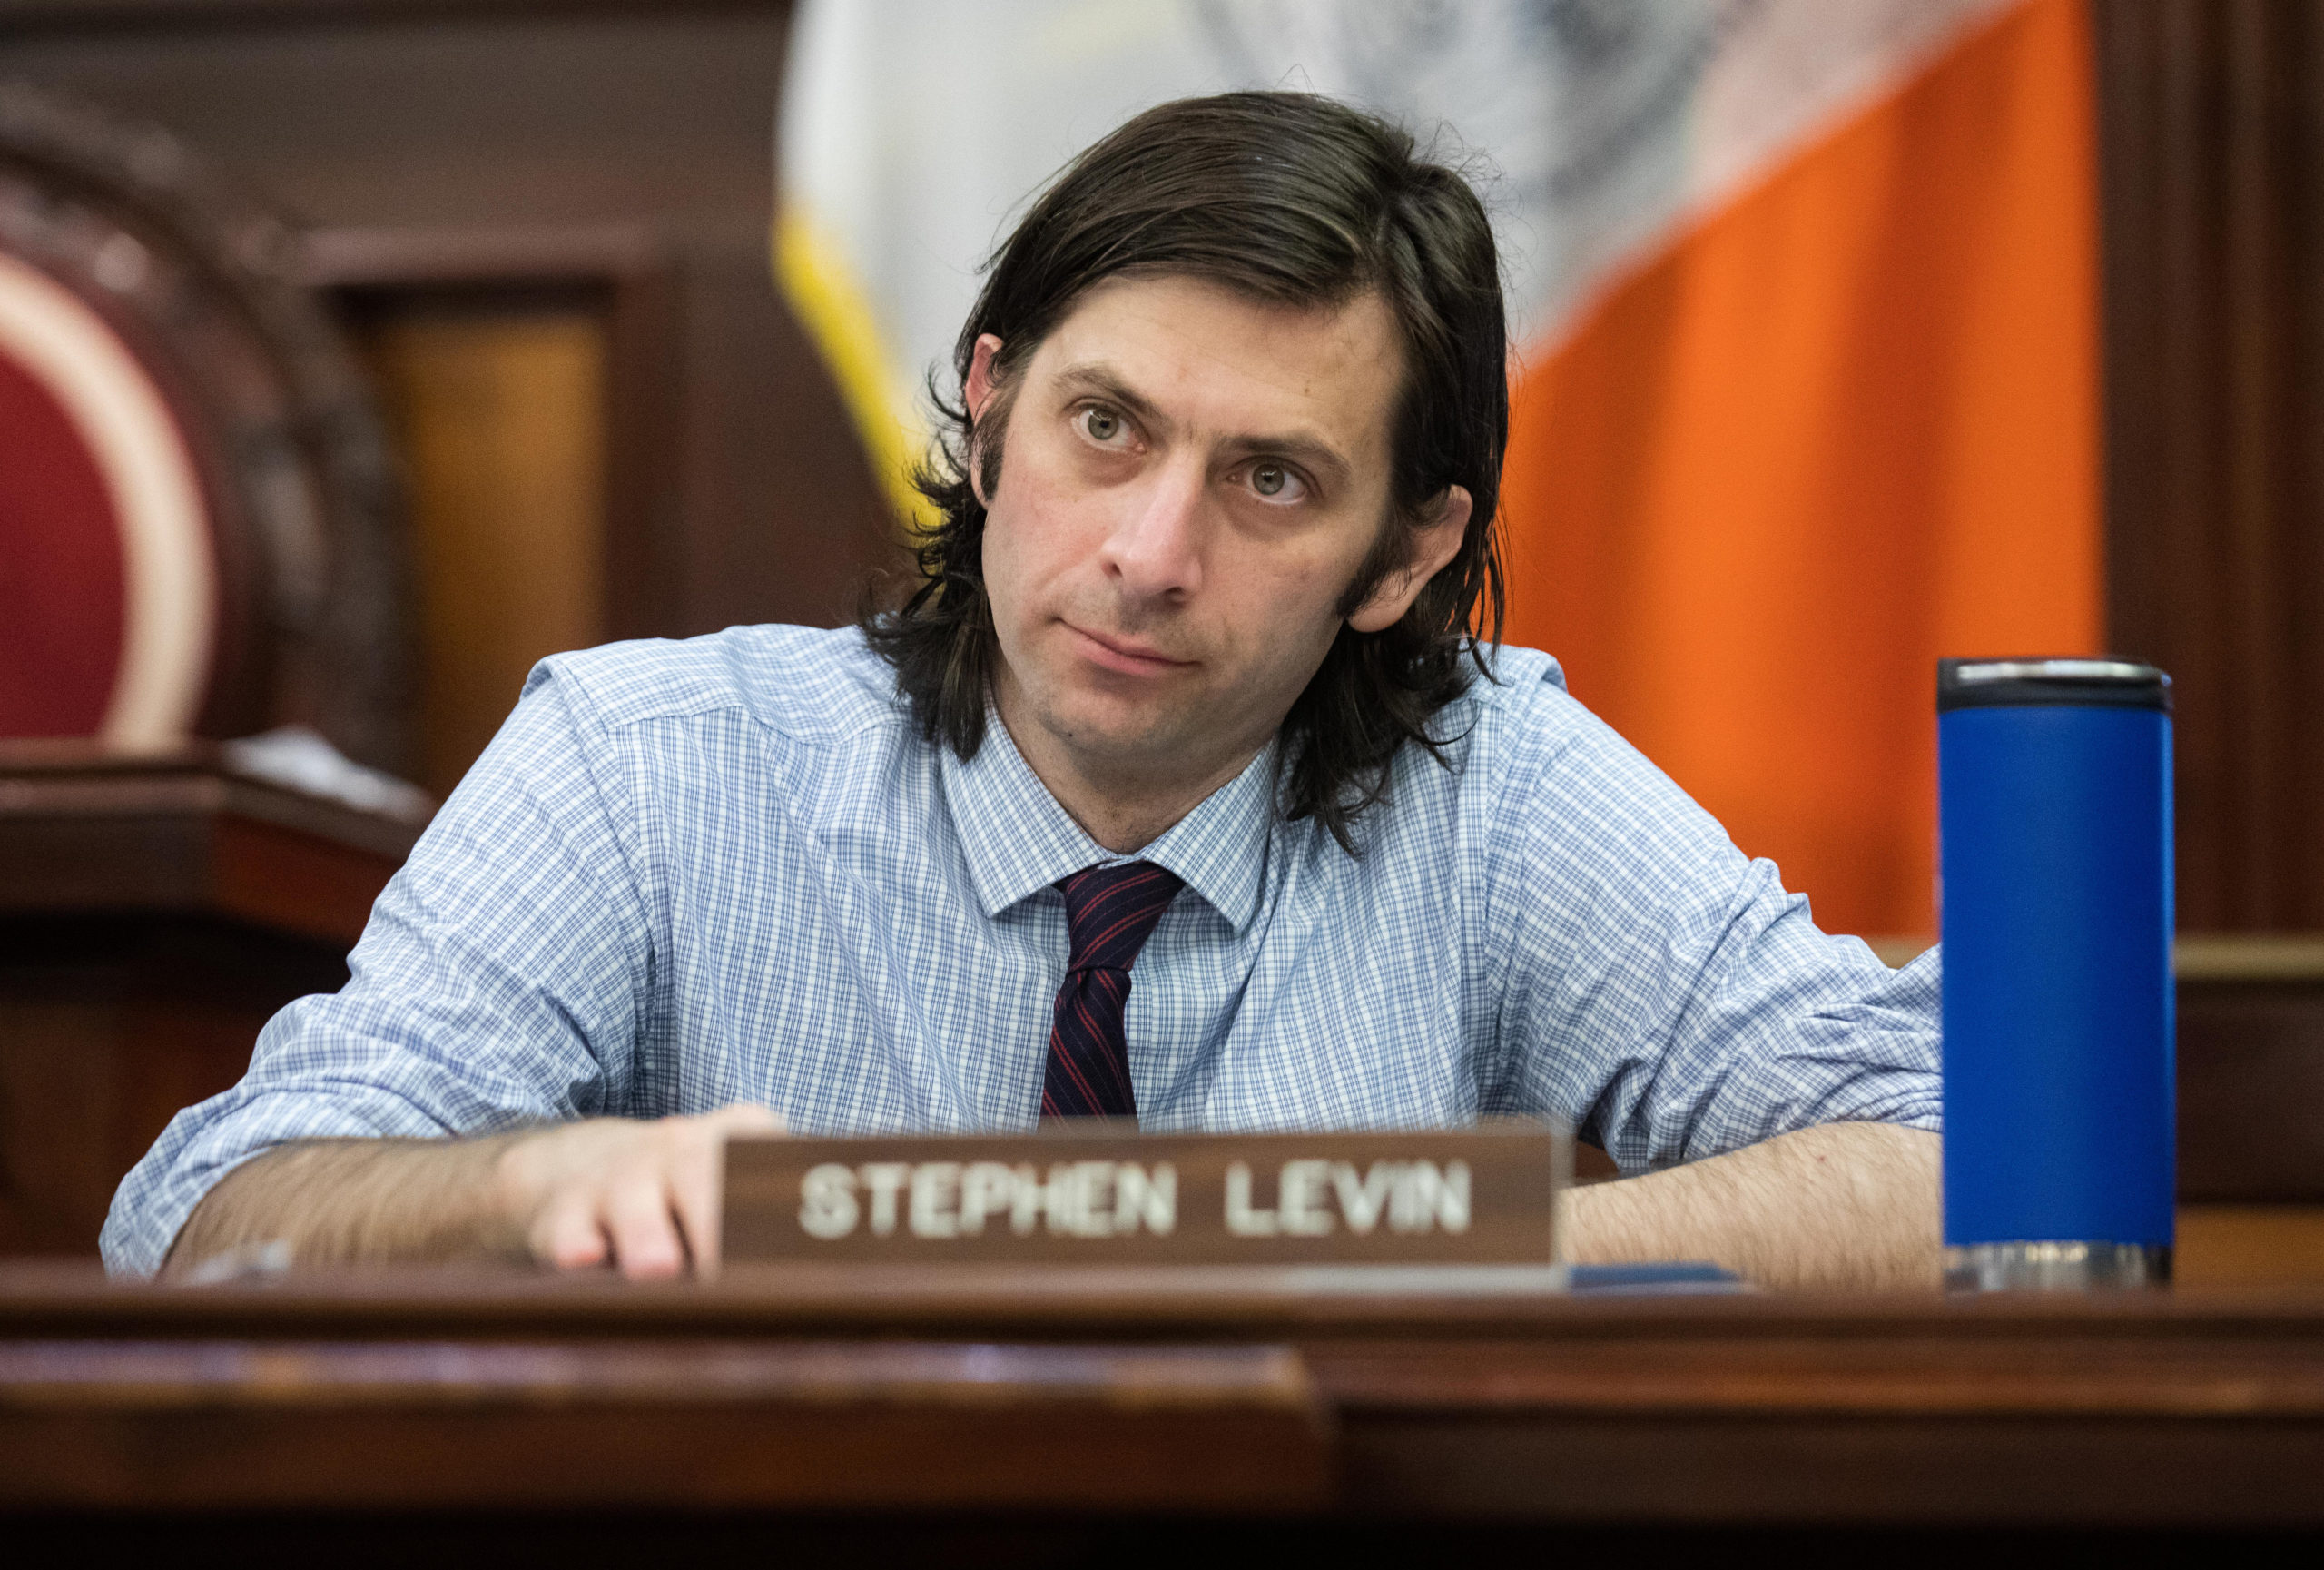 Councilmember Stephen Levin at a hearing in the City Council Committee on Transportation on the future of the Brooklyn-Queens Expressway on Feb. 25, 2020 at City Hall. Photo: Paul Frangipane/Brooklyn Eagle